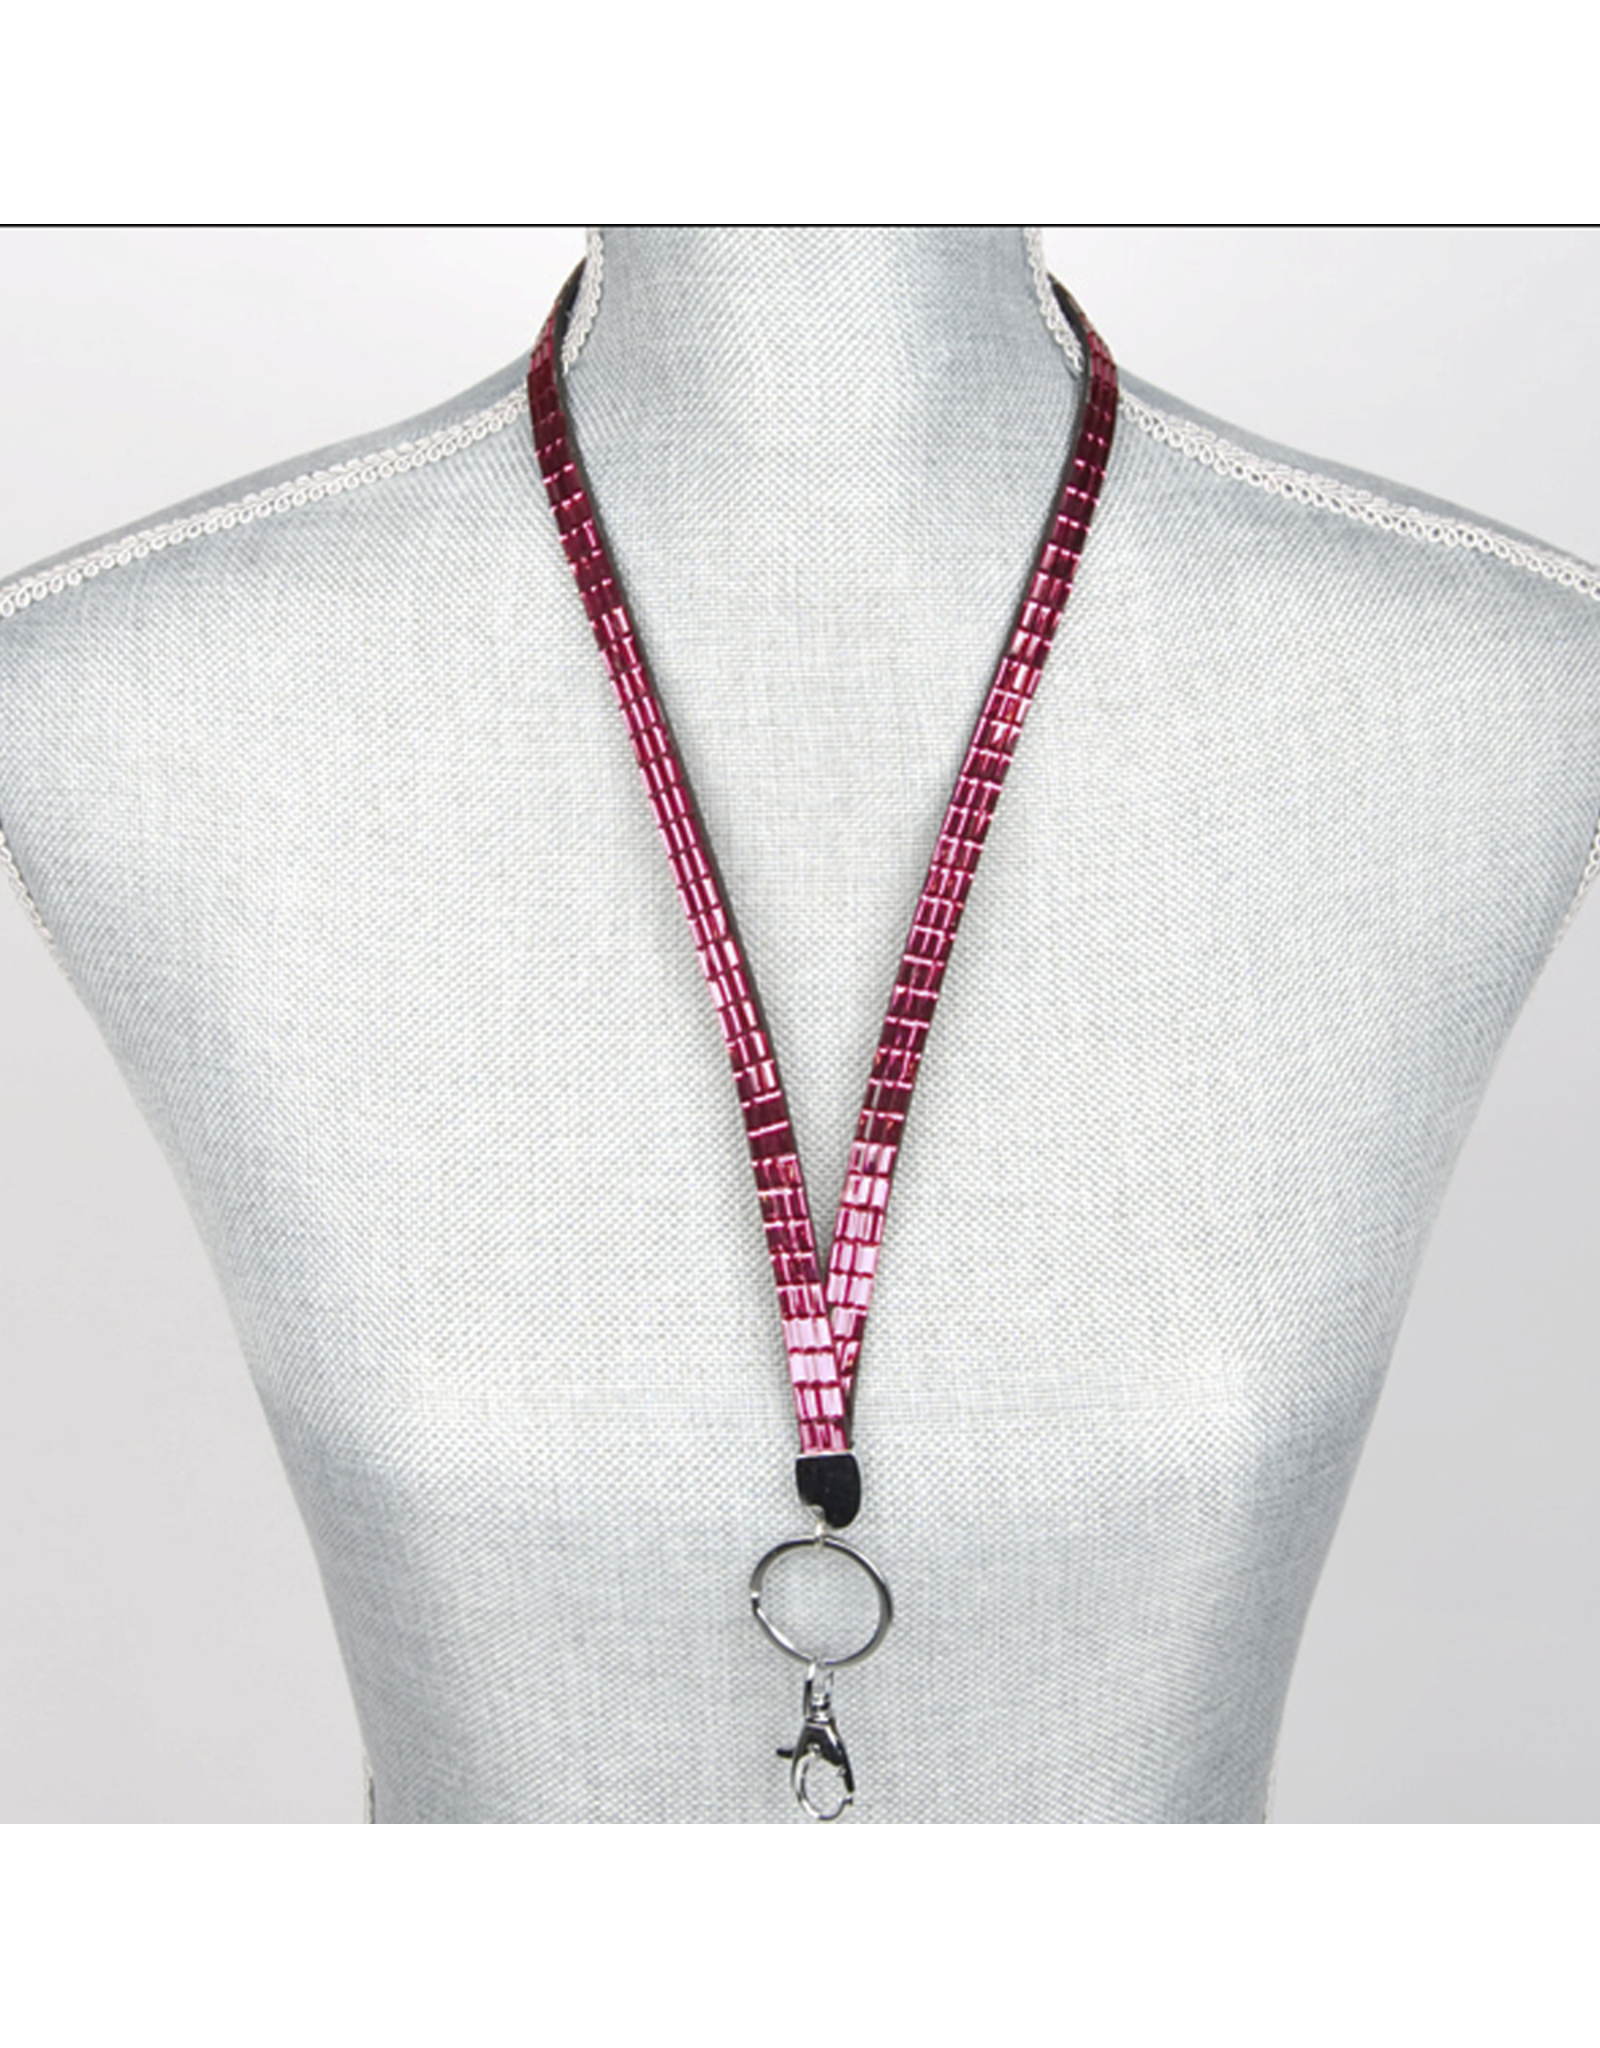 Jacqueline Kent Jewelry Crystal Bling Lanyard Red